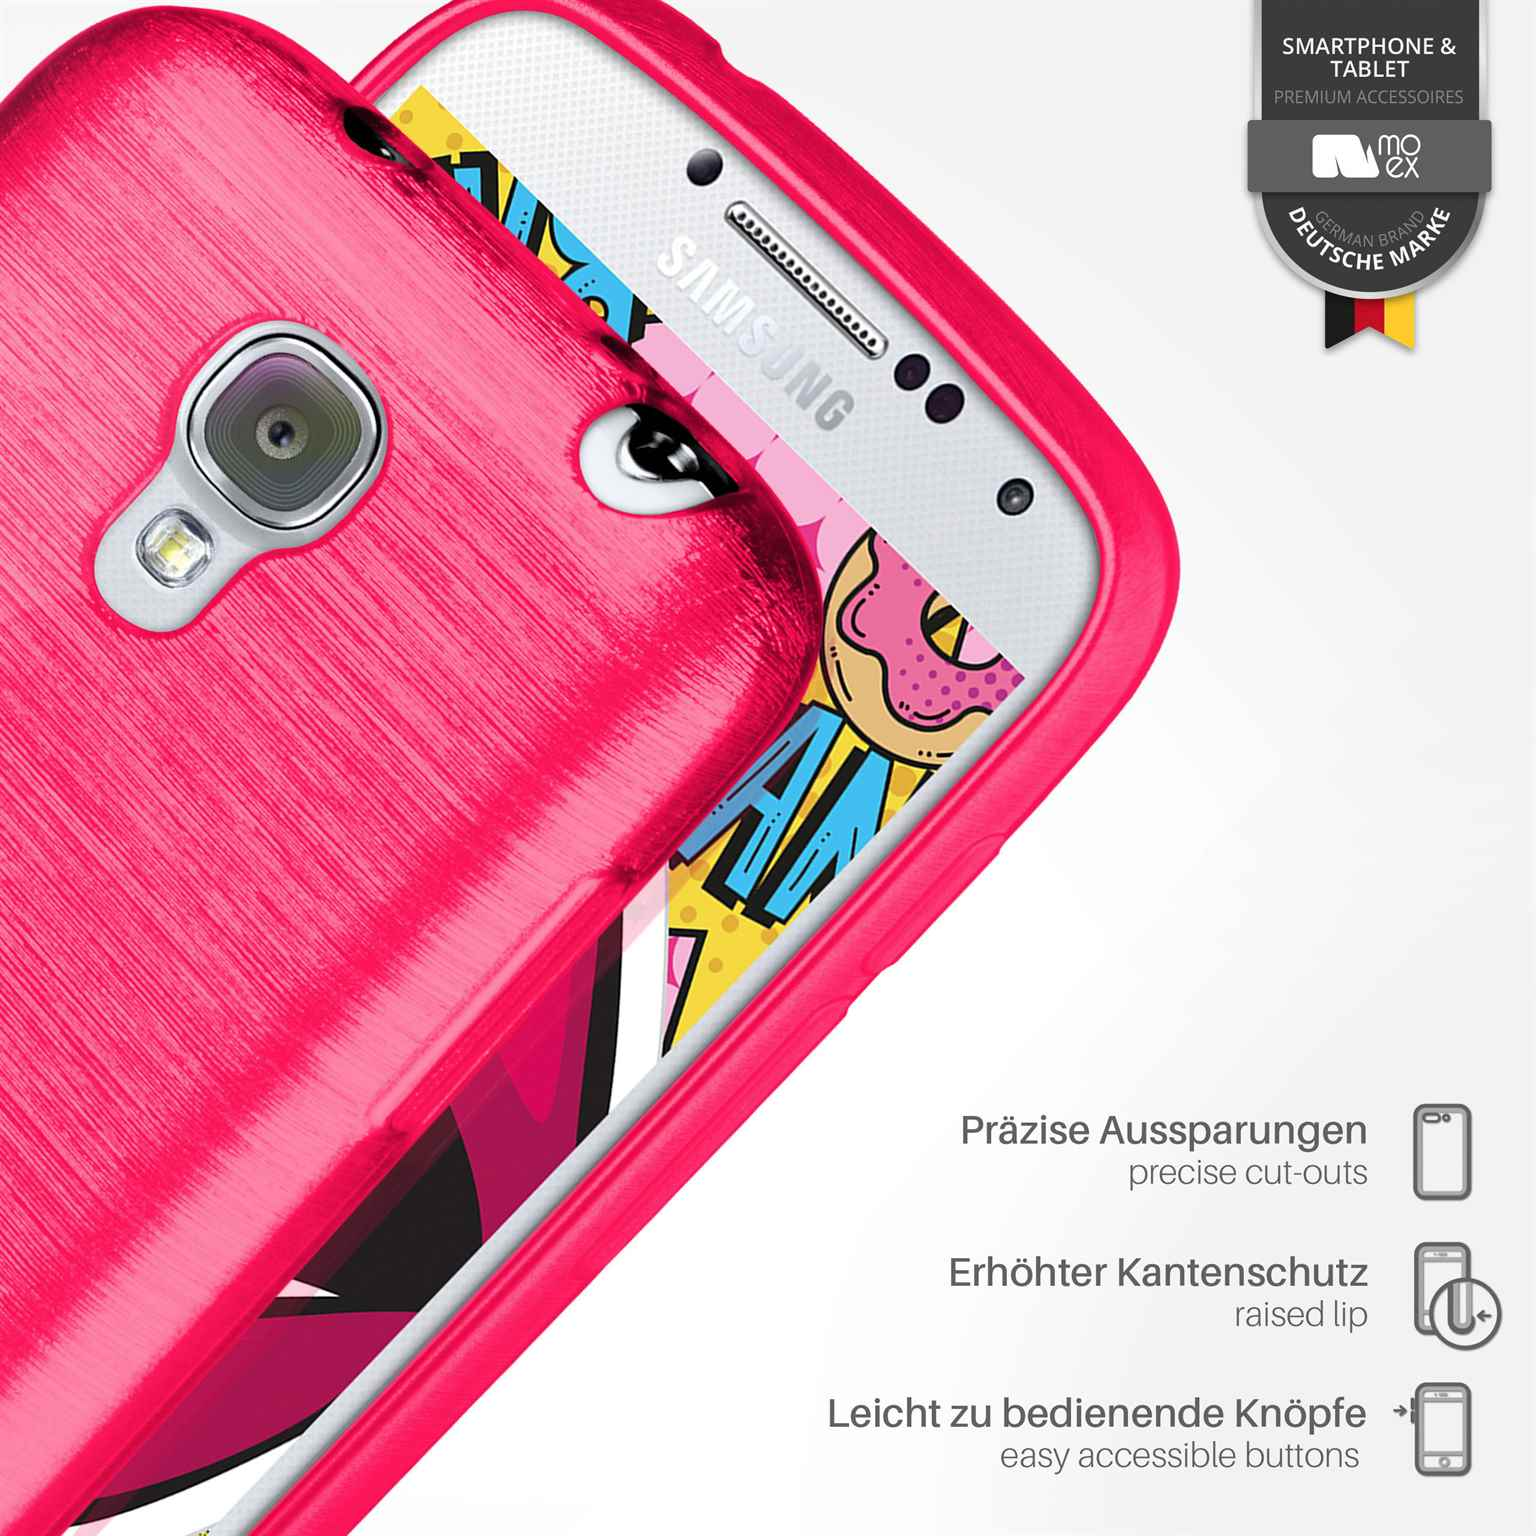 Backcover, S4, Brushed MOEX Galaxy Case, Samsung, Magenta-Pink